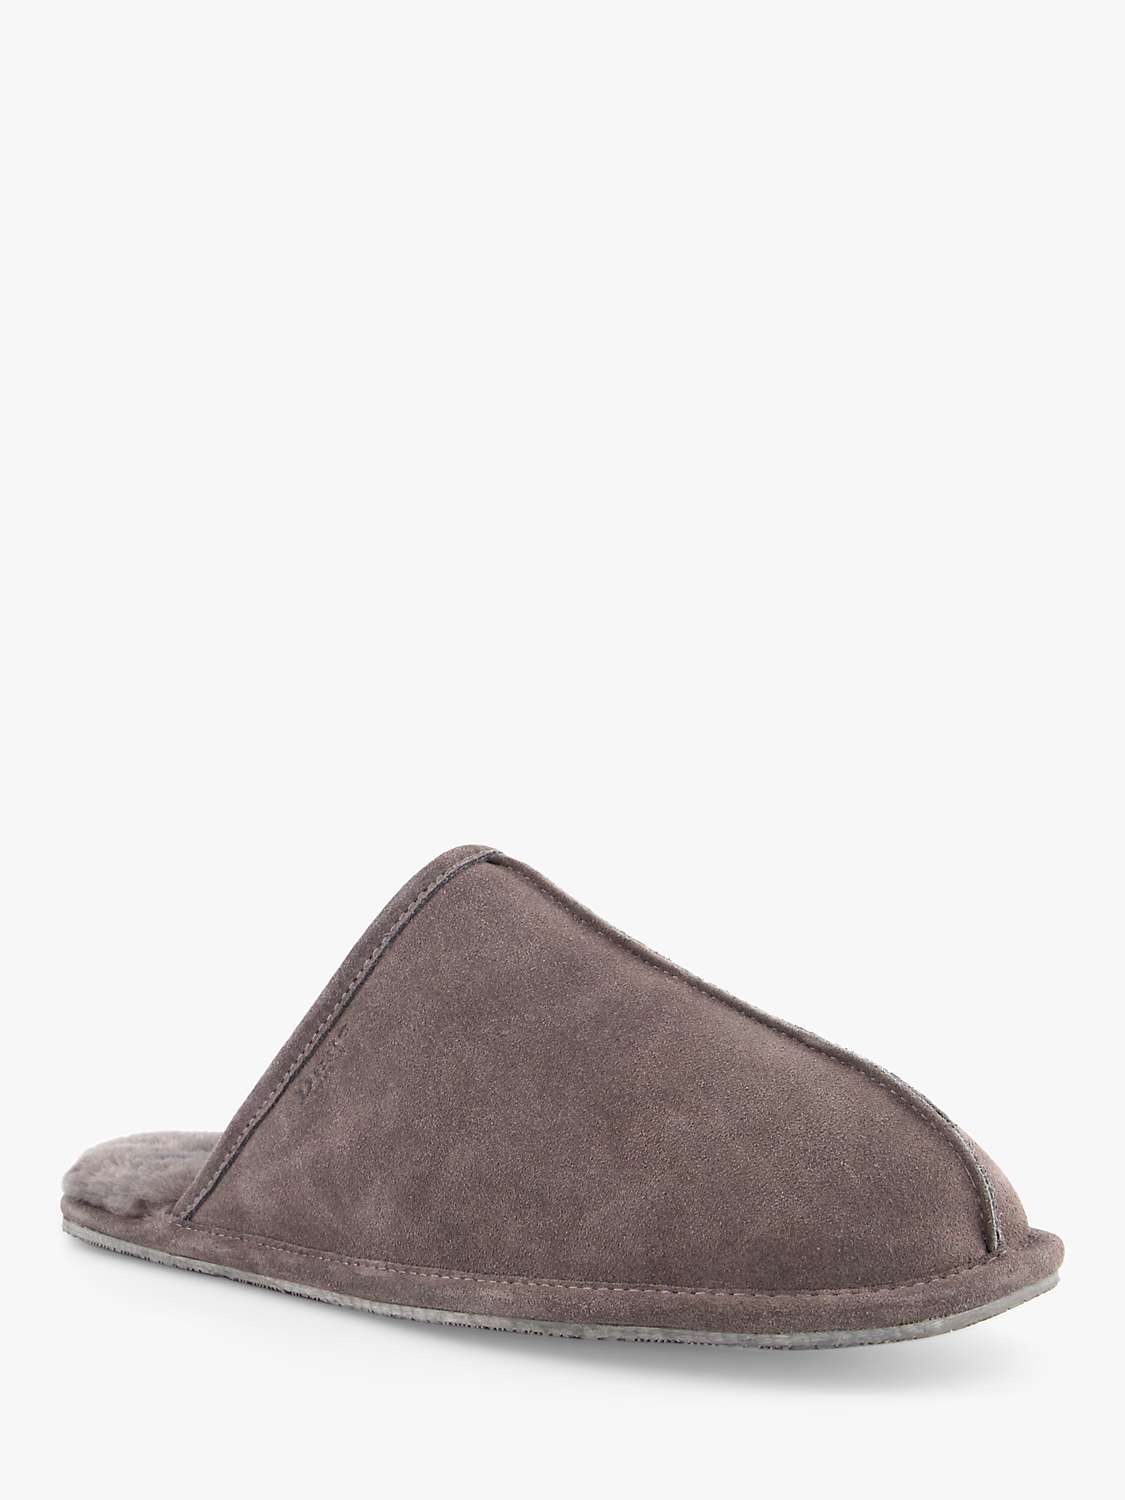 Buy Dune Forage Warm Lined Mule Slippers Online at johnlewis.com